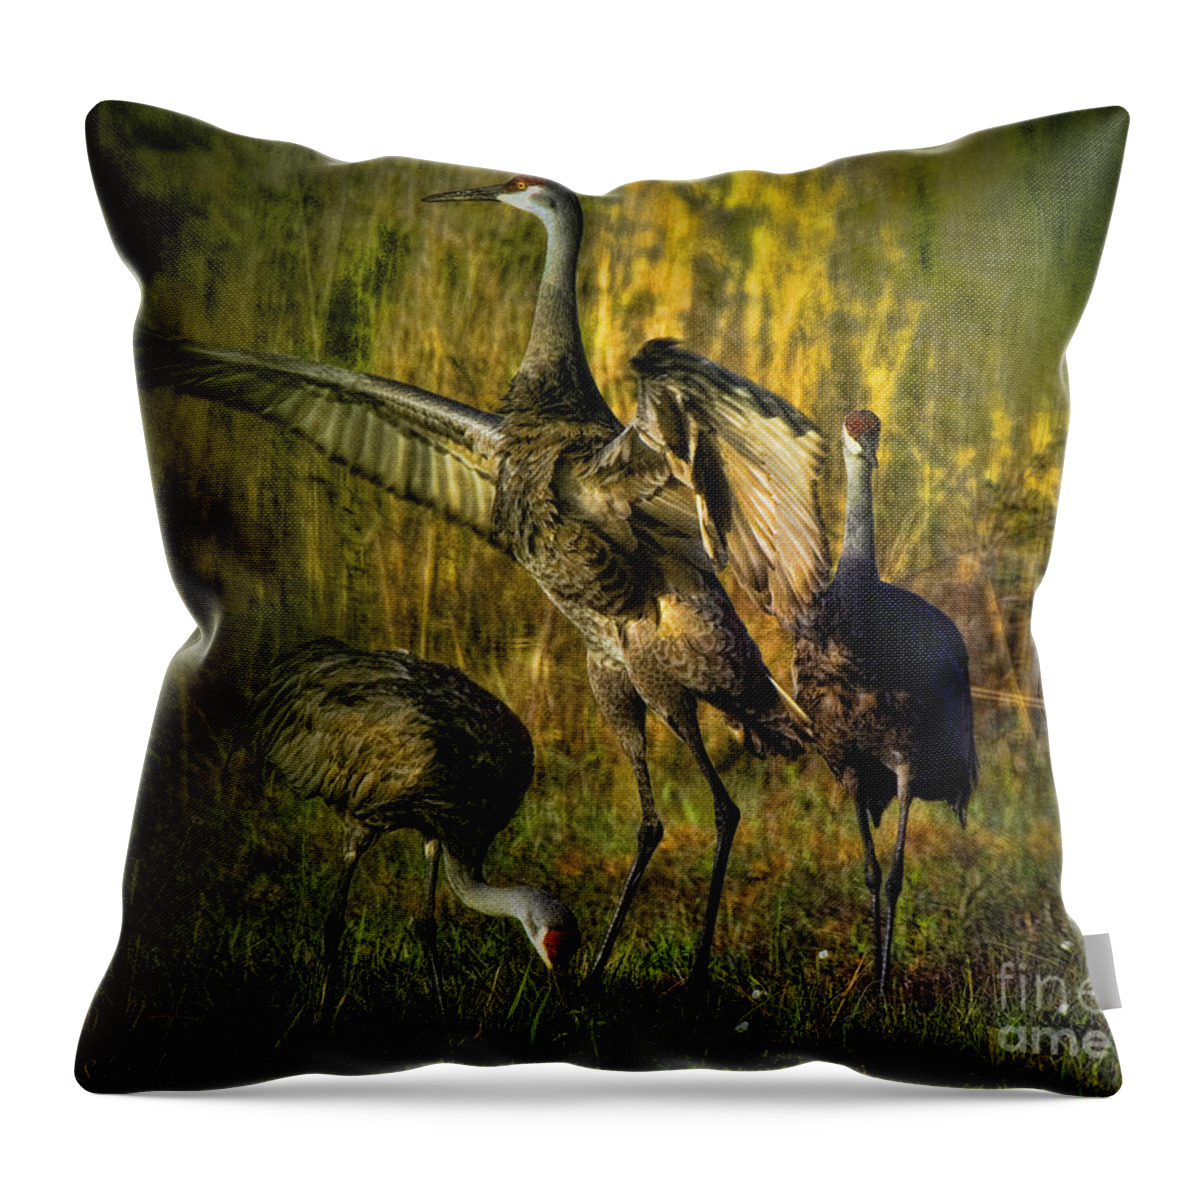 Birds Throw Pillow featuring the digital art May I Have This Dance by Lianne Schneider